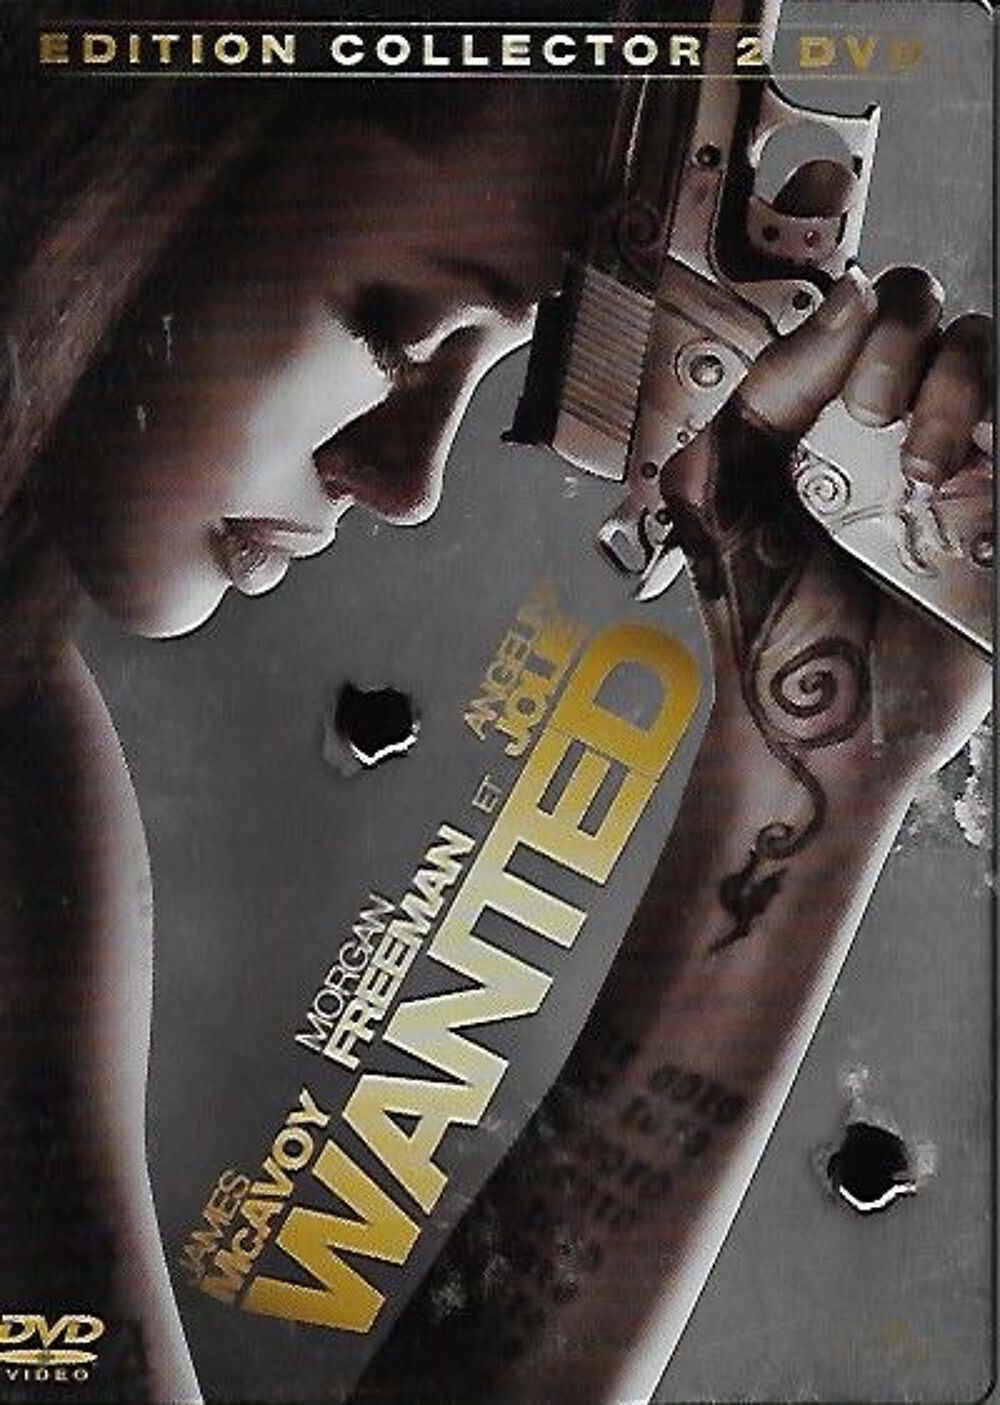 WANTED - Edition collector 2 DVD en boite m&eacute;tal DVD et blu-ray